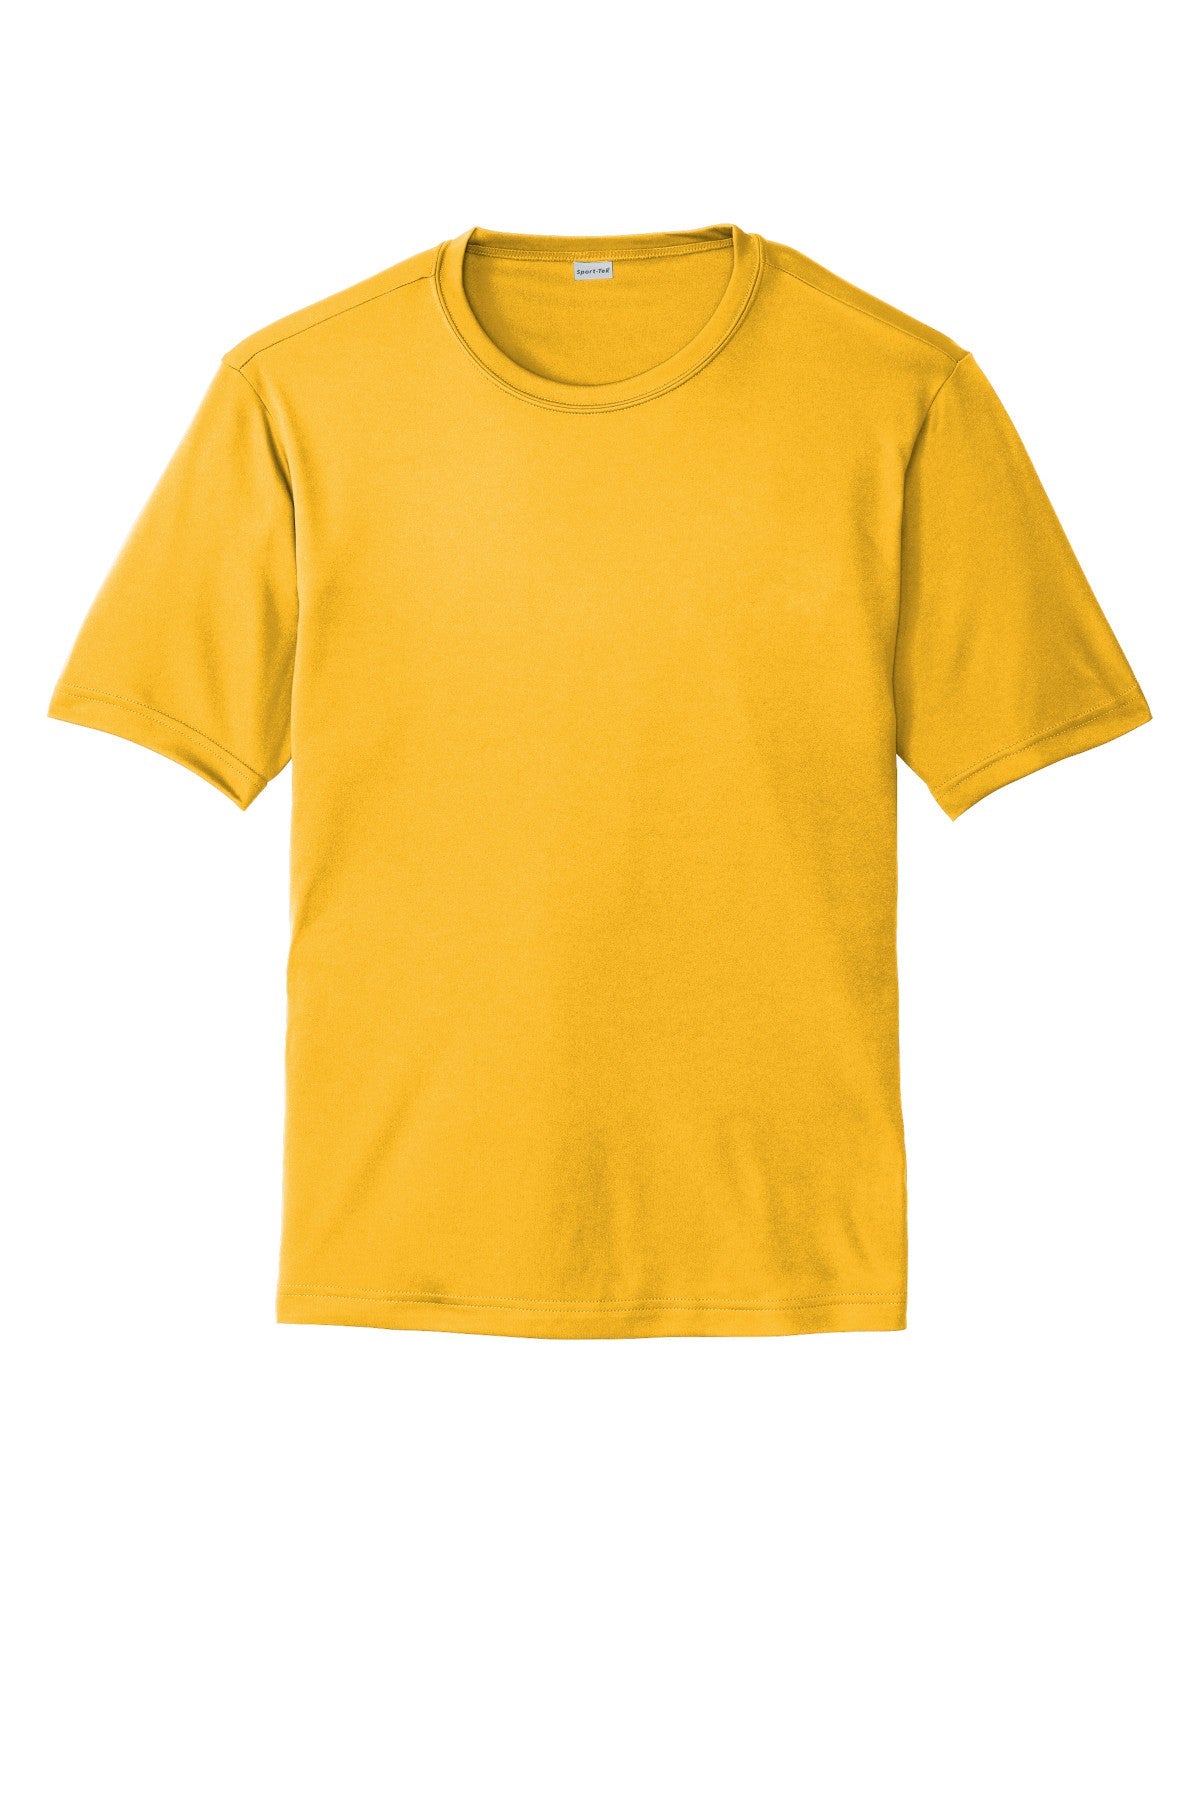 Sport-Tek St350 Polyester Adult T-Shirt Ad Small / Gold